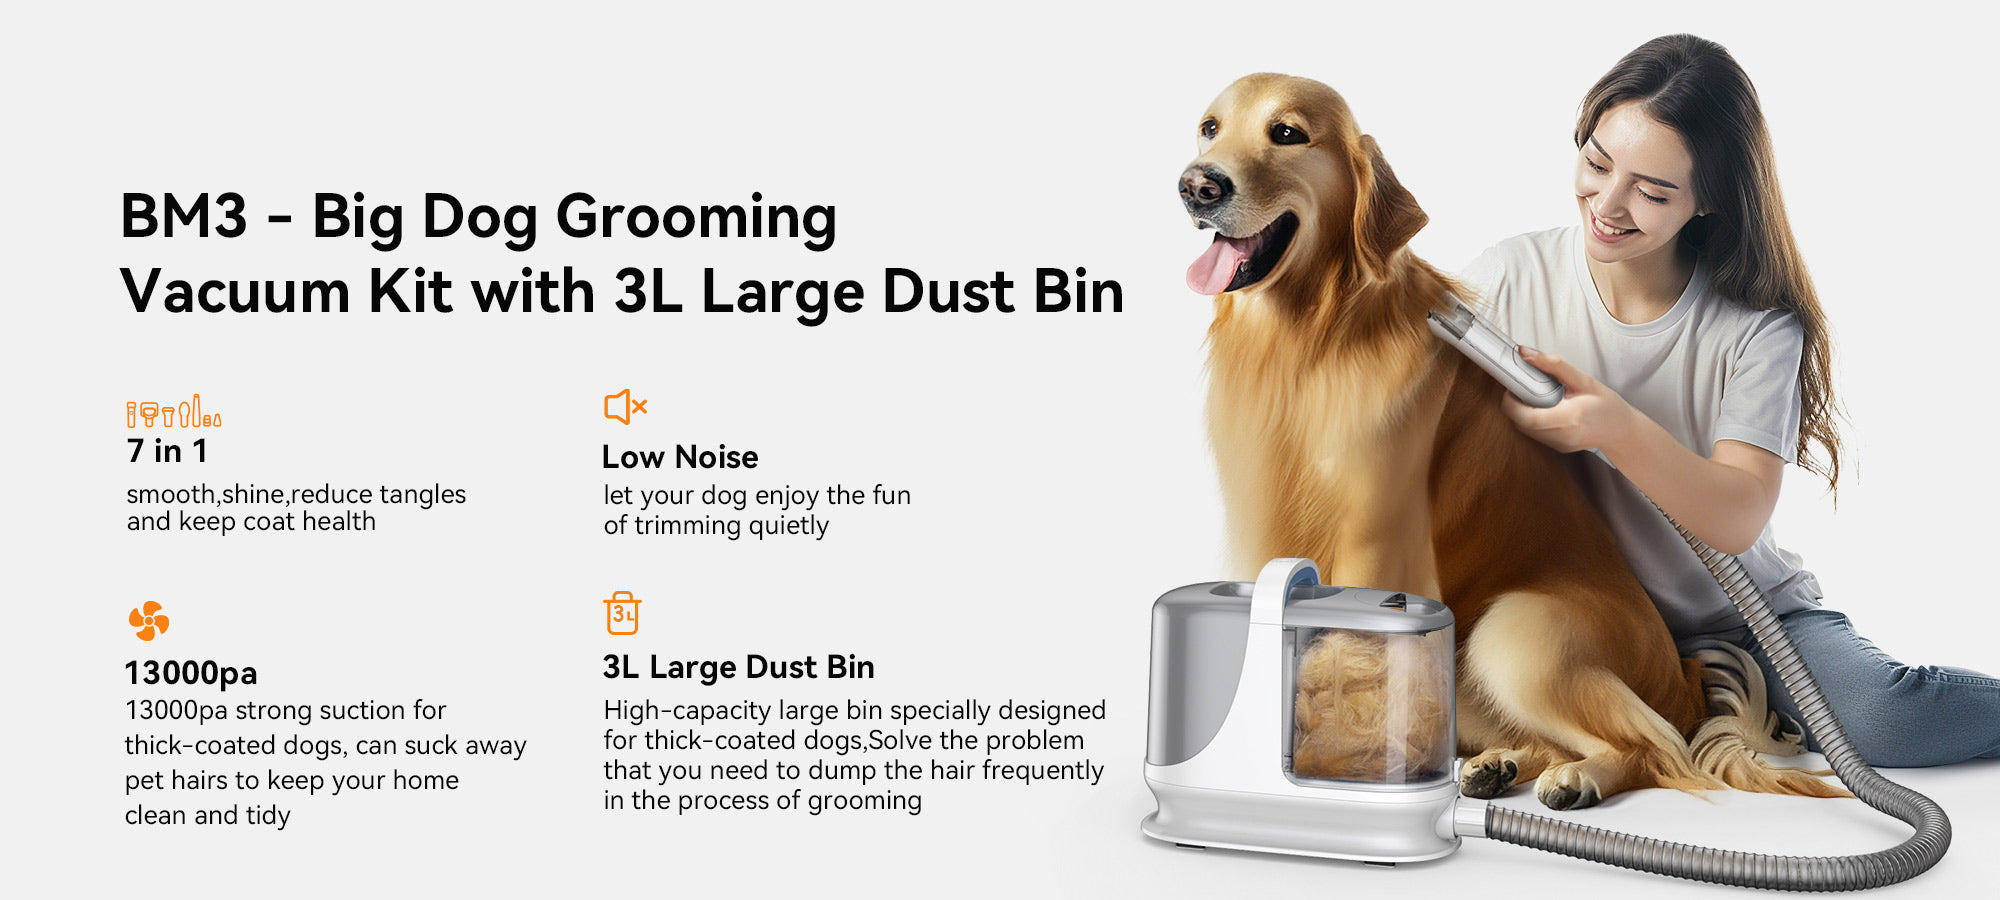 oneisall bm3 grooming vacuum for large dog